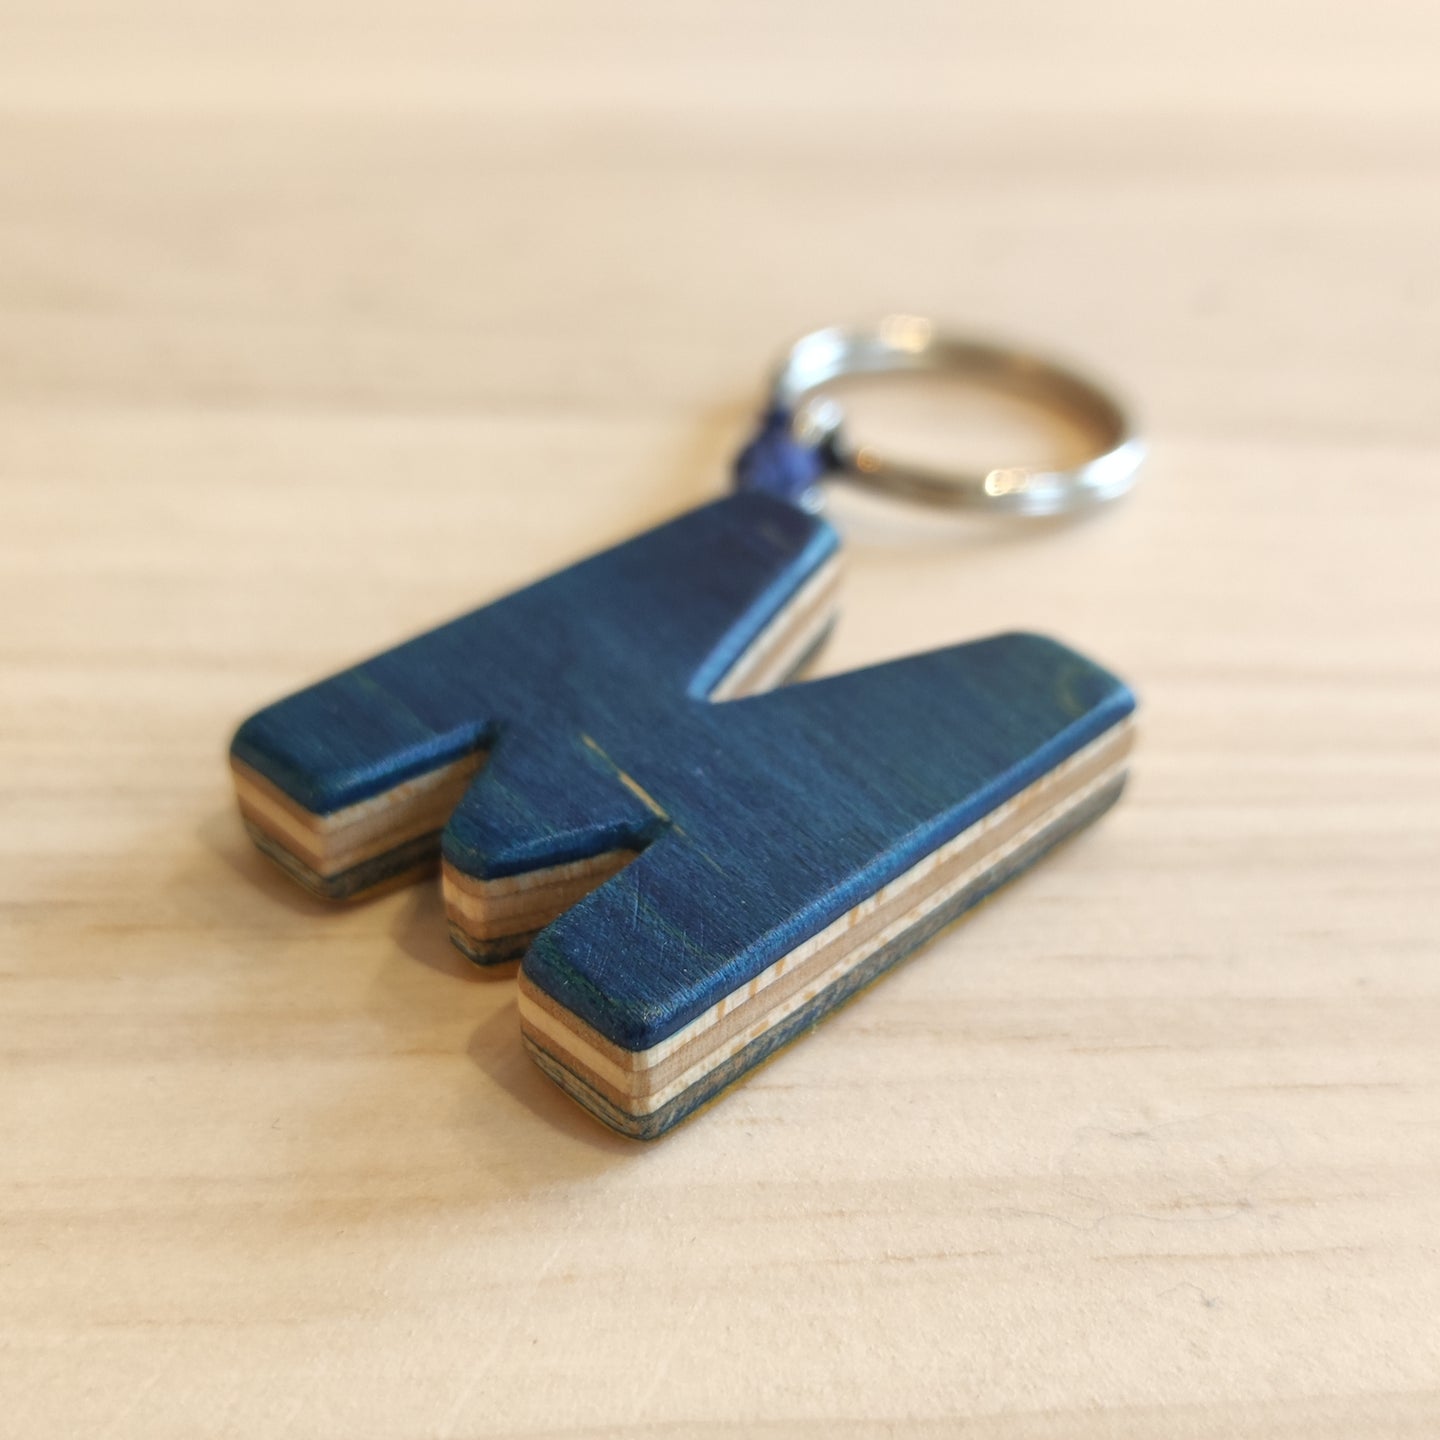 Personalized keychain made to order